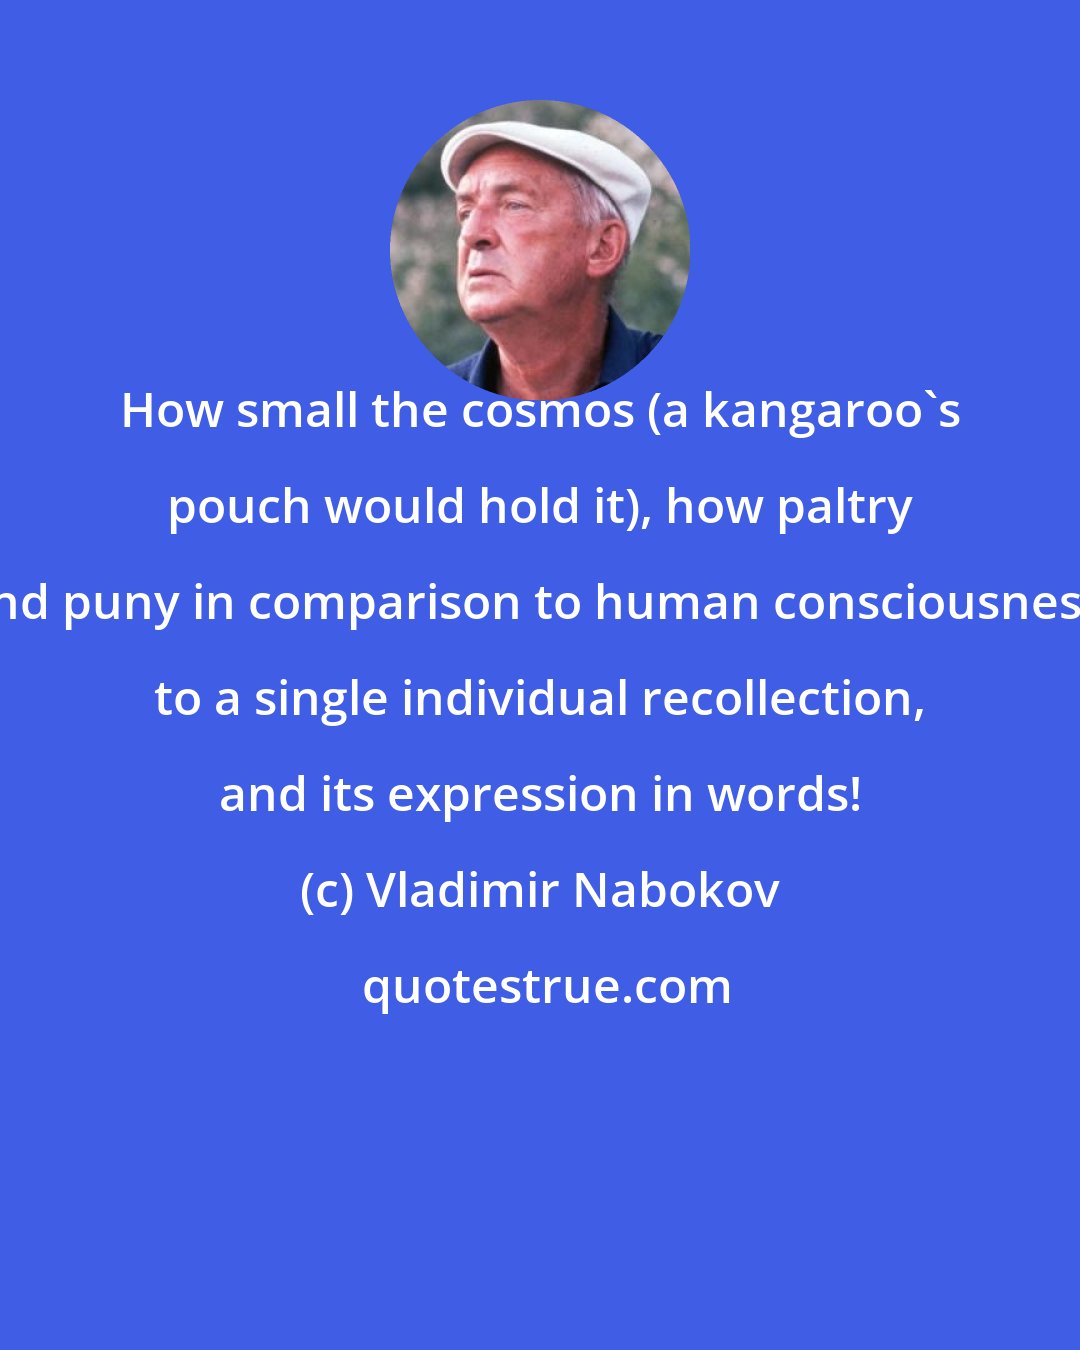 Vladimir Nabokov: How small the cosmos (a kangaroo's pouch would hold it), how paltry and puny in comparison to human consciousness, to a single individual recollection, and its expression in words!